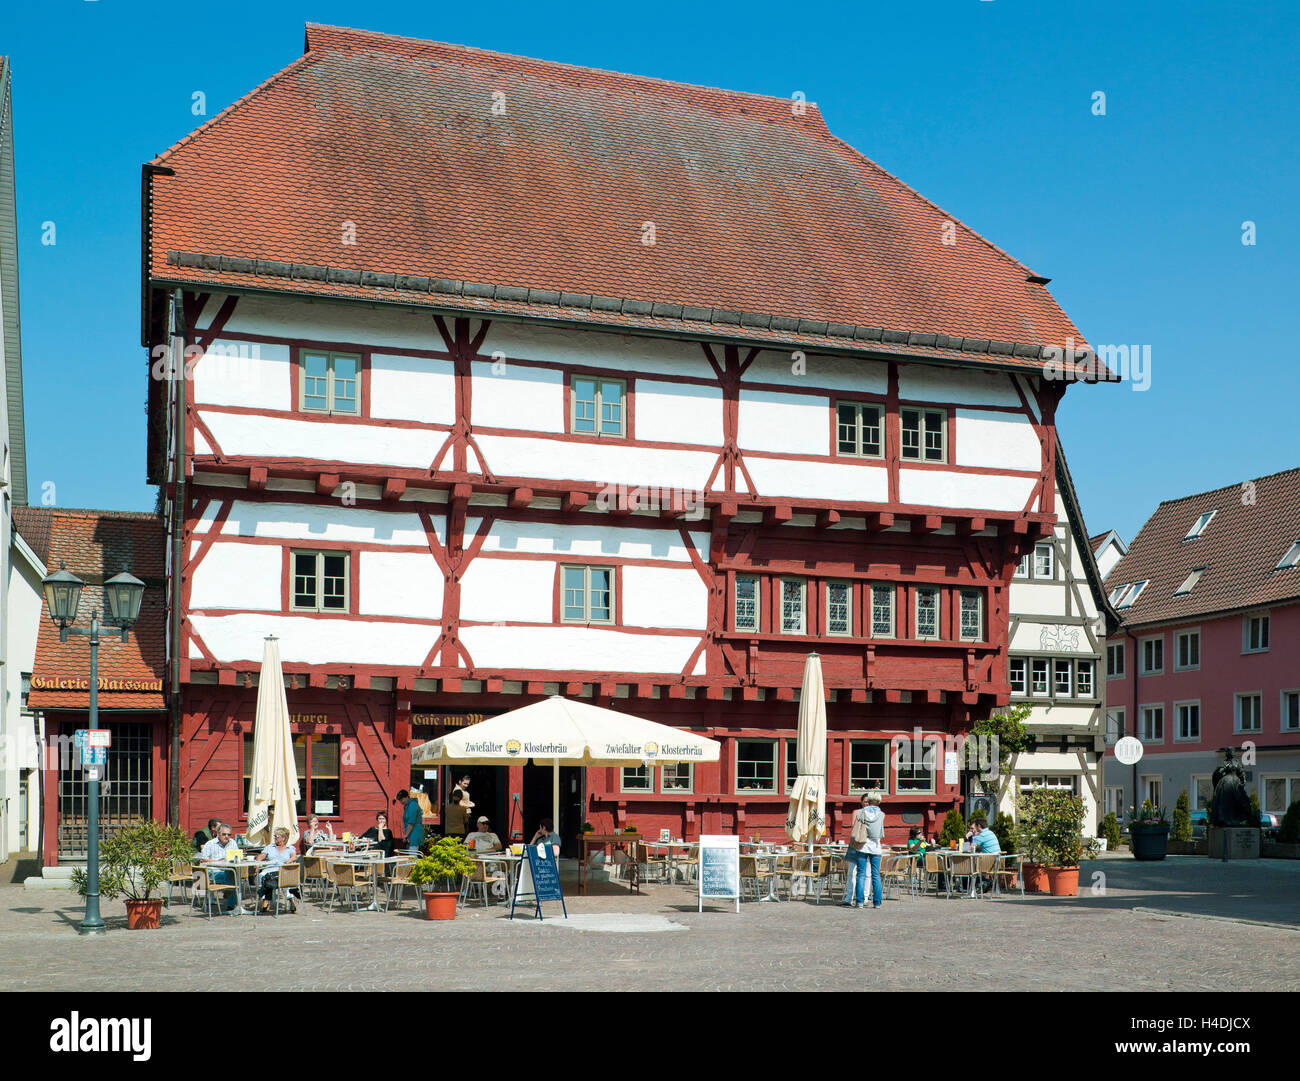 Germany, Baden-Wurttemberg, bath Saulgau, historical marketplace with the historical half-timbered house 'House in the market' from 1400, Stock Photo